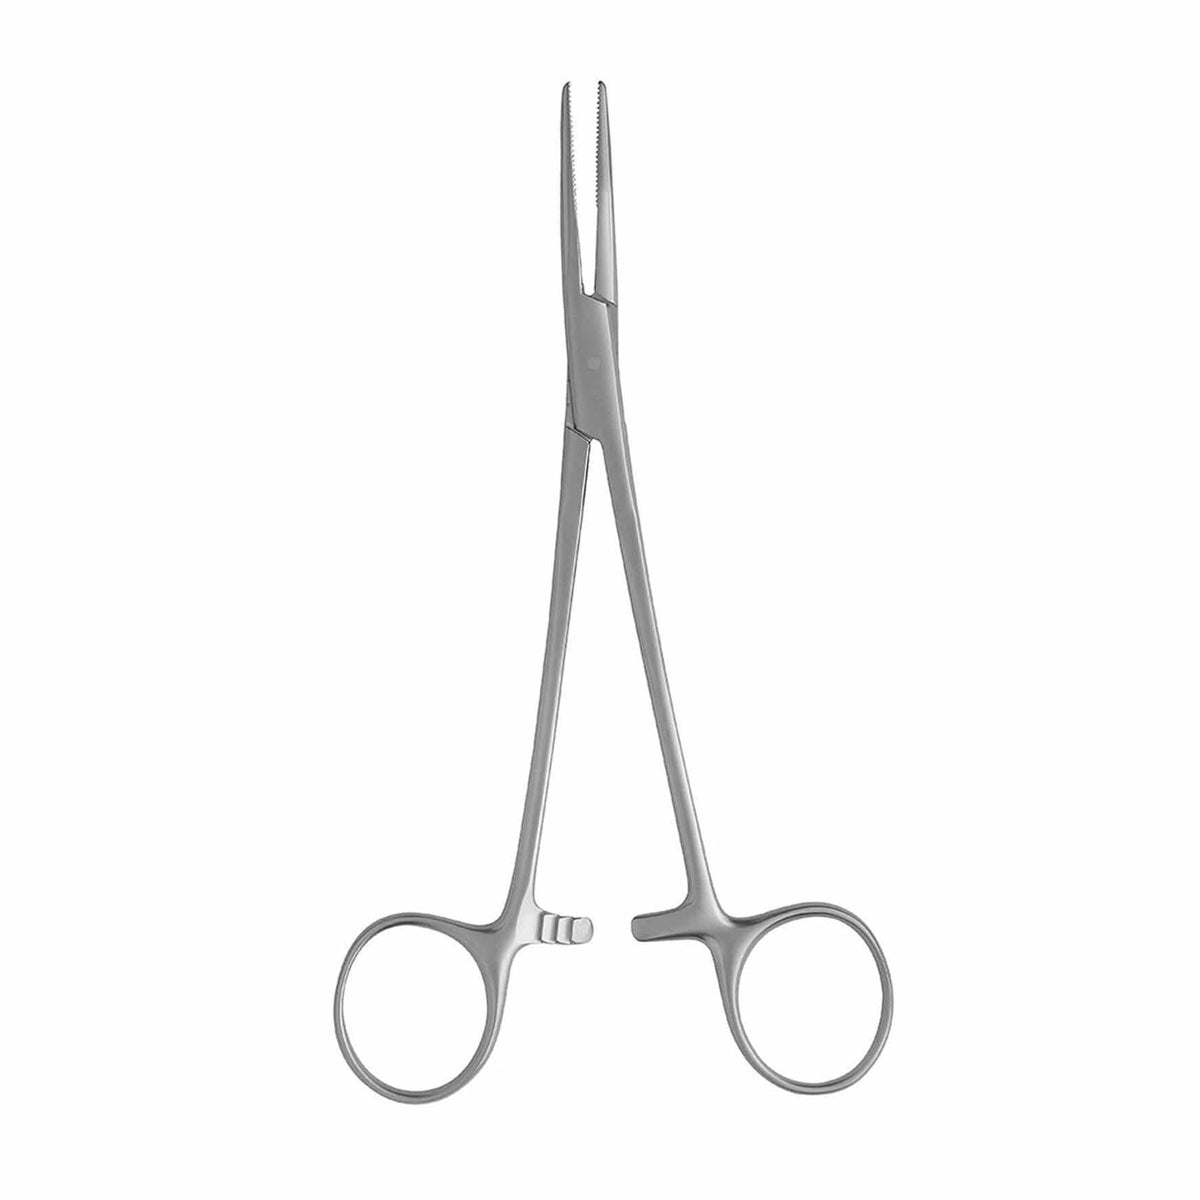 Armo Surgical Instruments 23cm / Straight Armo Moynihan Artery Forceps